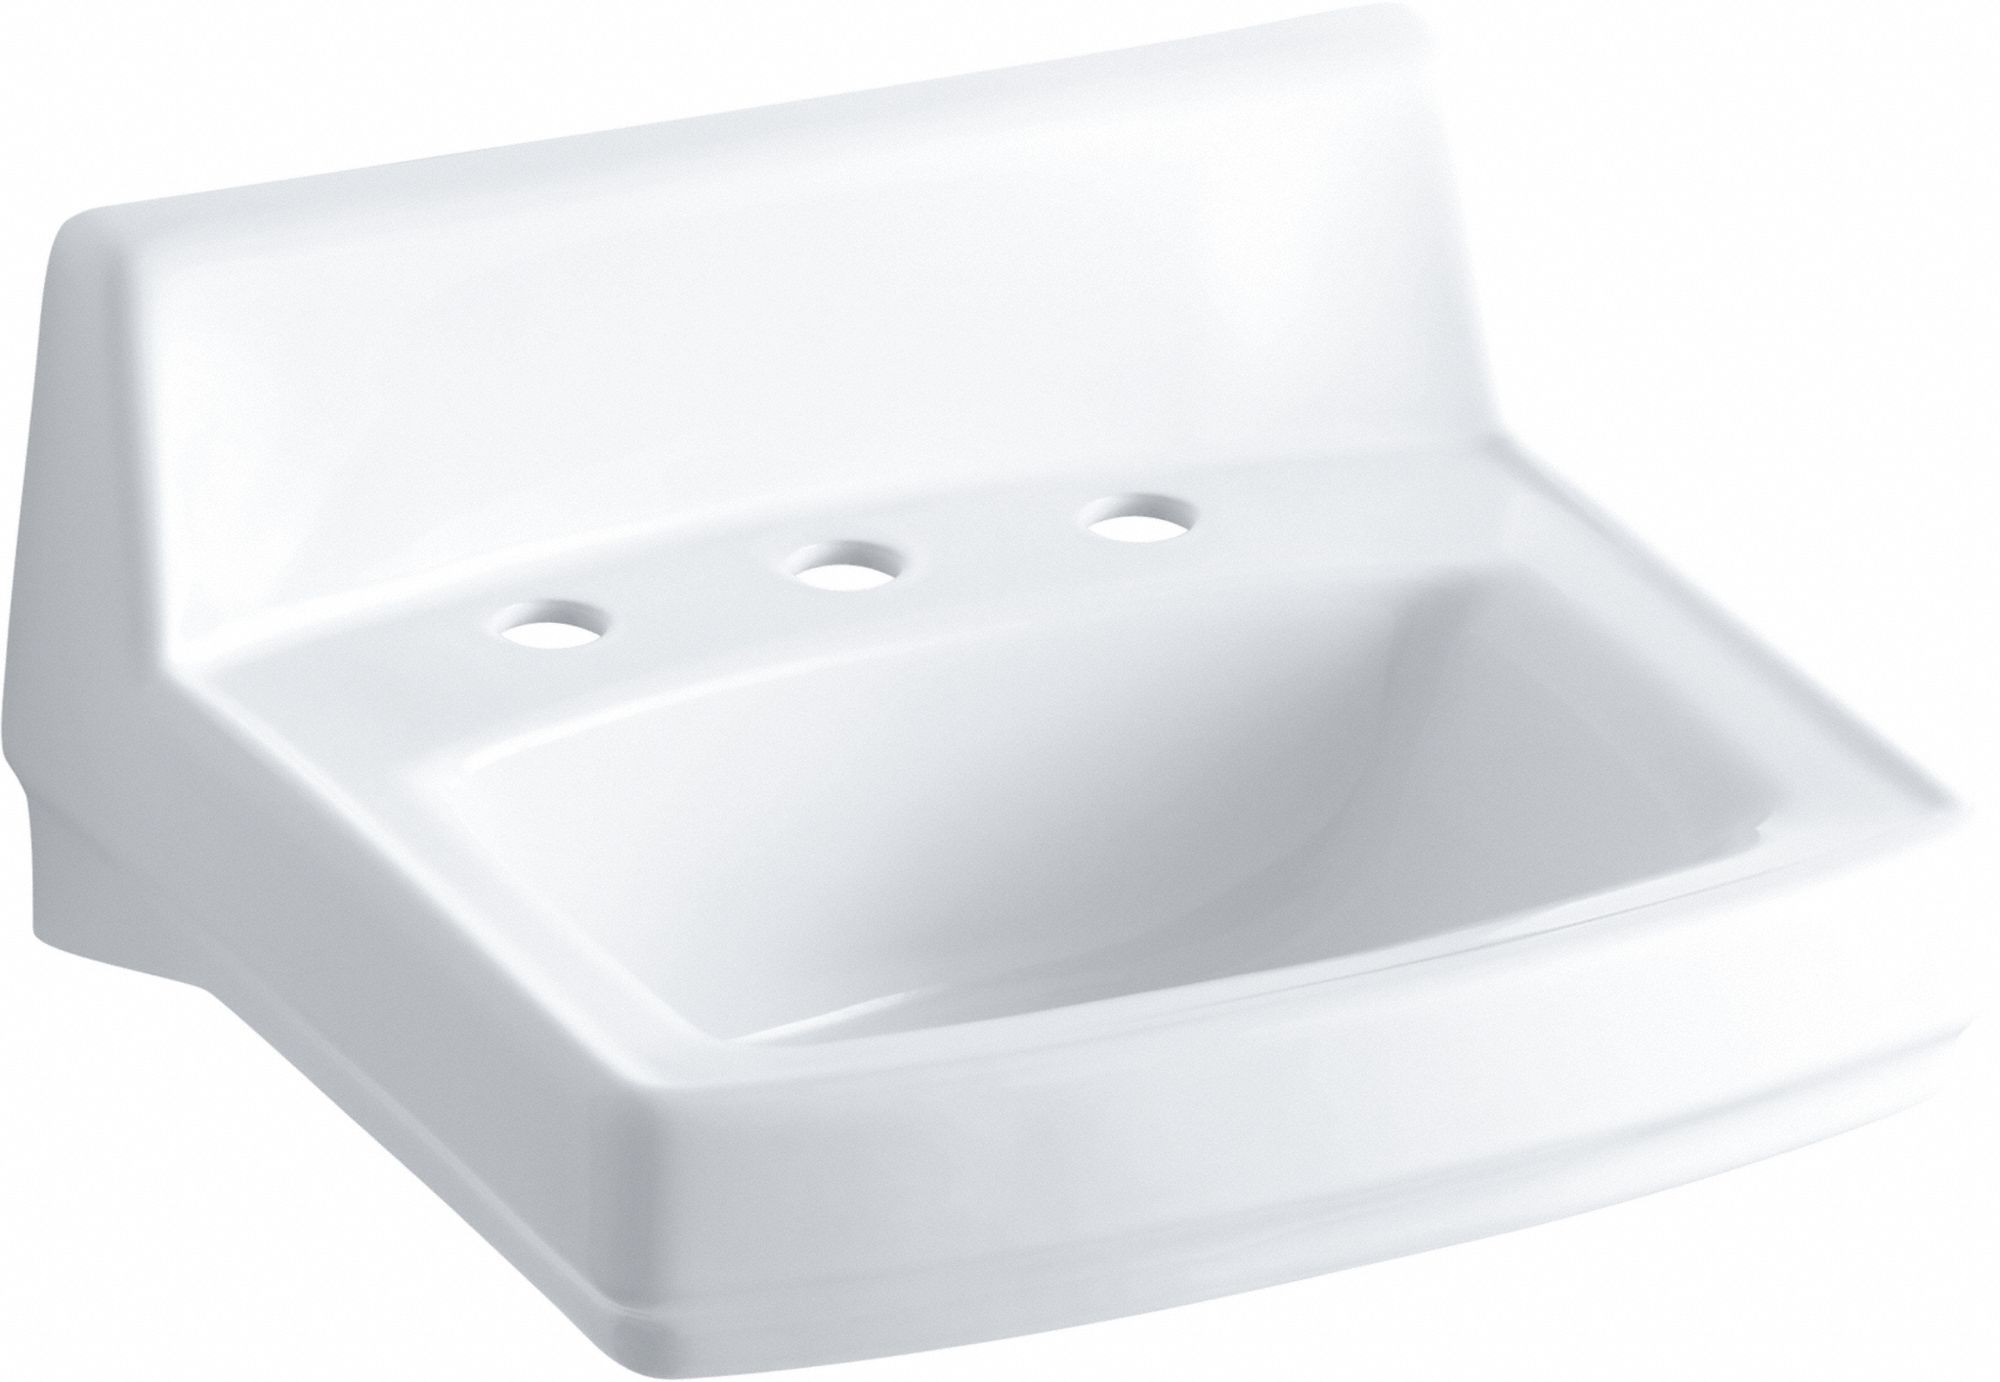 Bathroom Sink: Kohler, Greenwich(TM), White, Vitreous China, 20 3/4 in Overall Lg, 7 in Bowl Dp